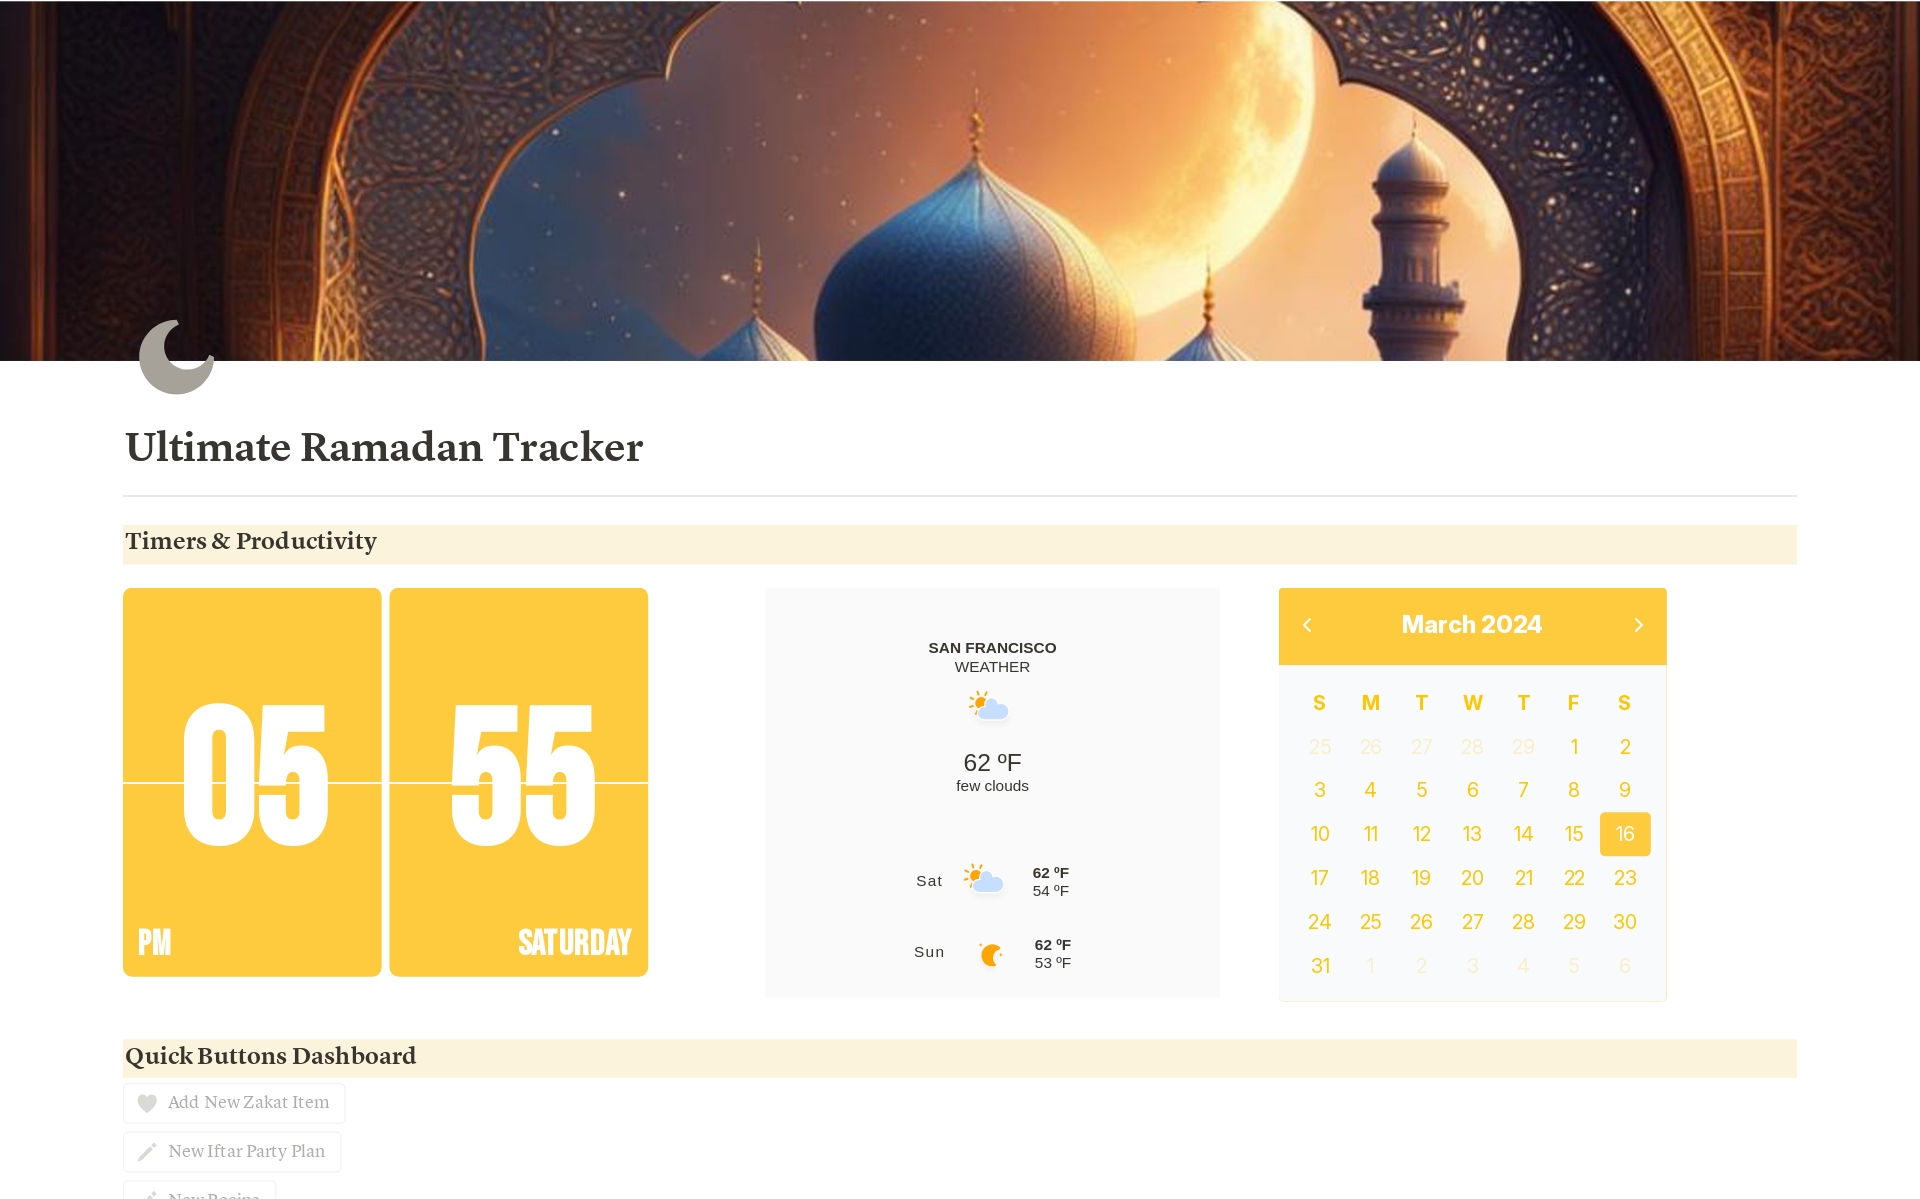 Introducing the Ultimate Ramadan Tracker Notion Template – your all-in-one solution to make the most out of the holy month of Ramadan. Crafted with meticulous attention to detail, this customizable Notion template is designed to help you streamline your tasks and habits.